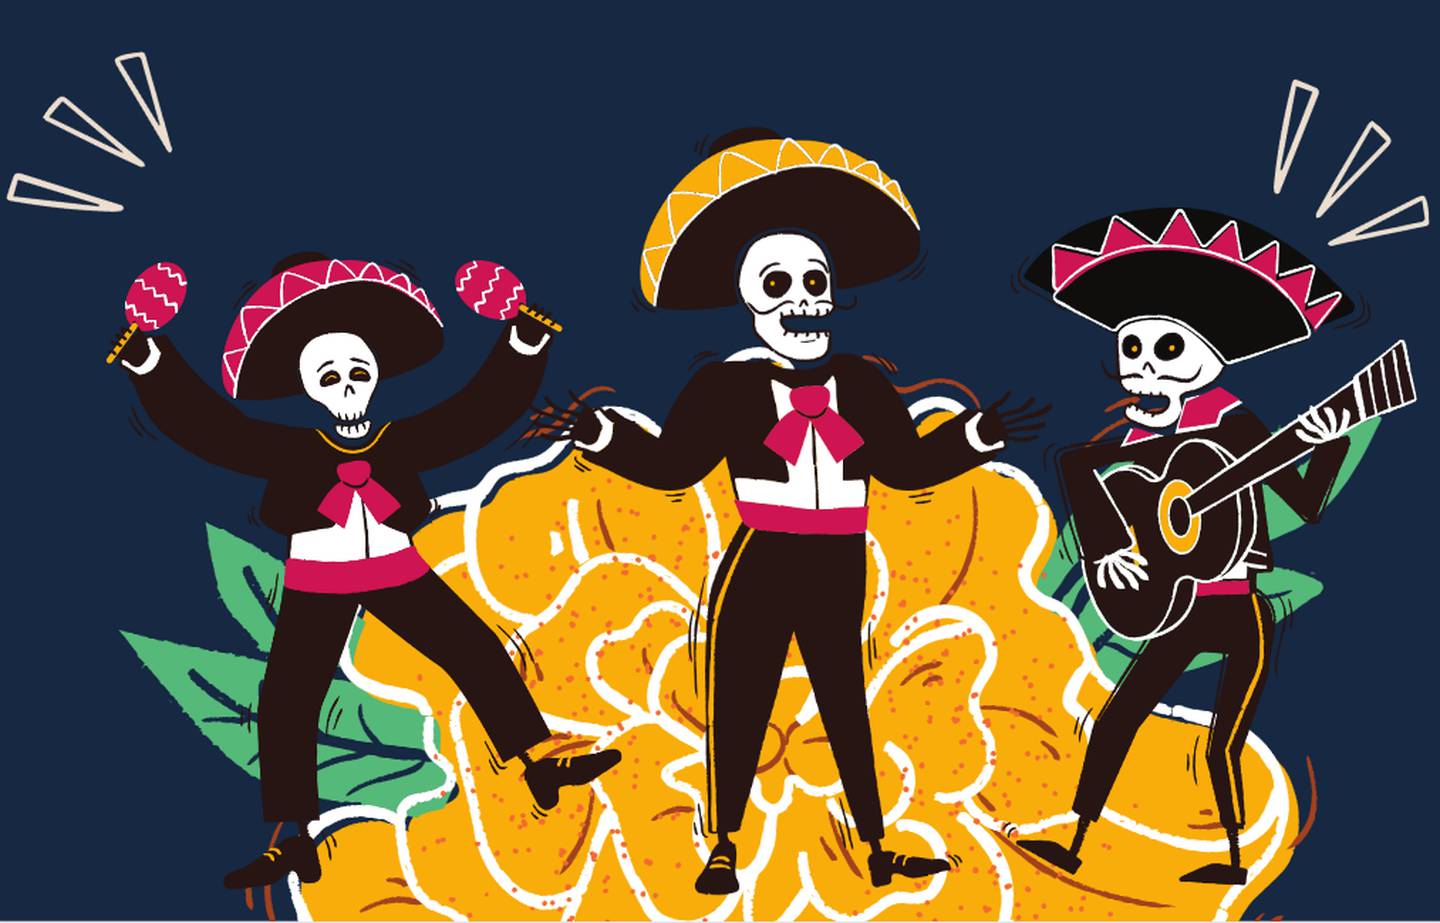 Celebrate the Day of the Dead Festival in Annapolis Saturday, with sugar skull displays, music, dancing and food at Maryland Hall.